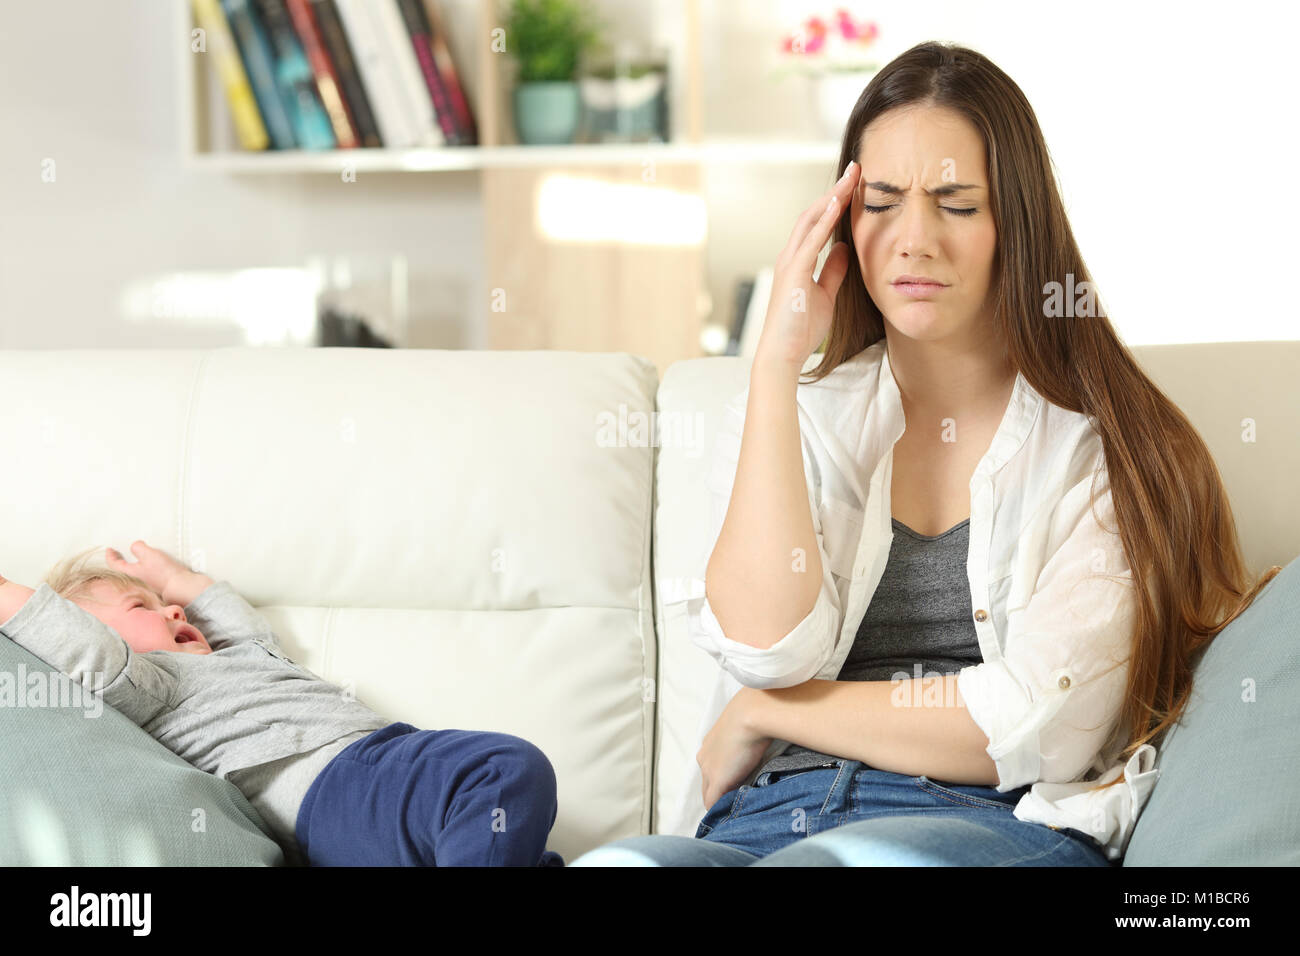 Front view portrait of an annoyed mother with her baby son crying sitting on a couch in the living room at home Stock Photo